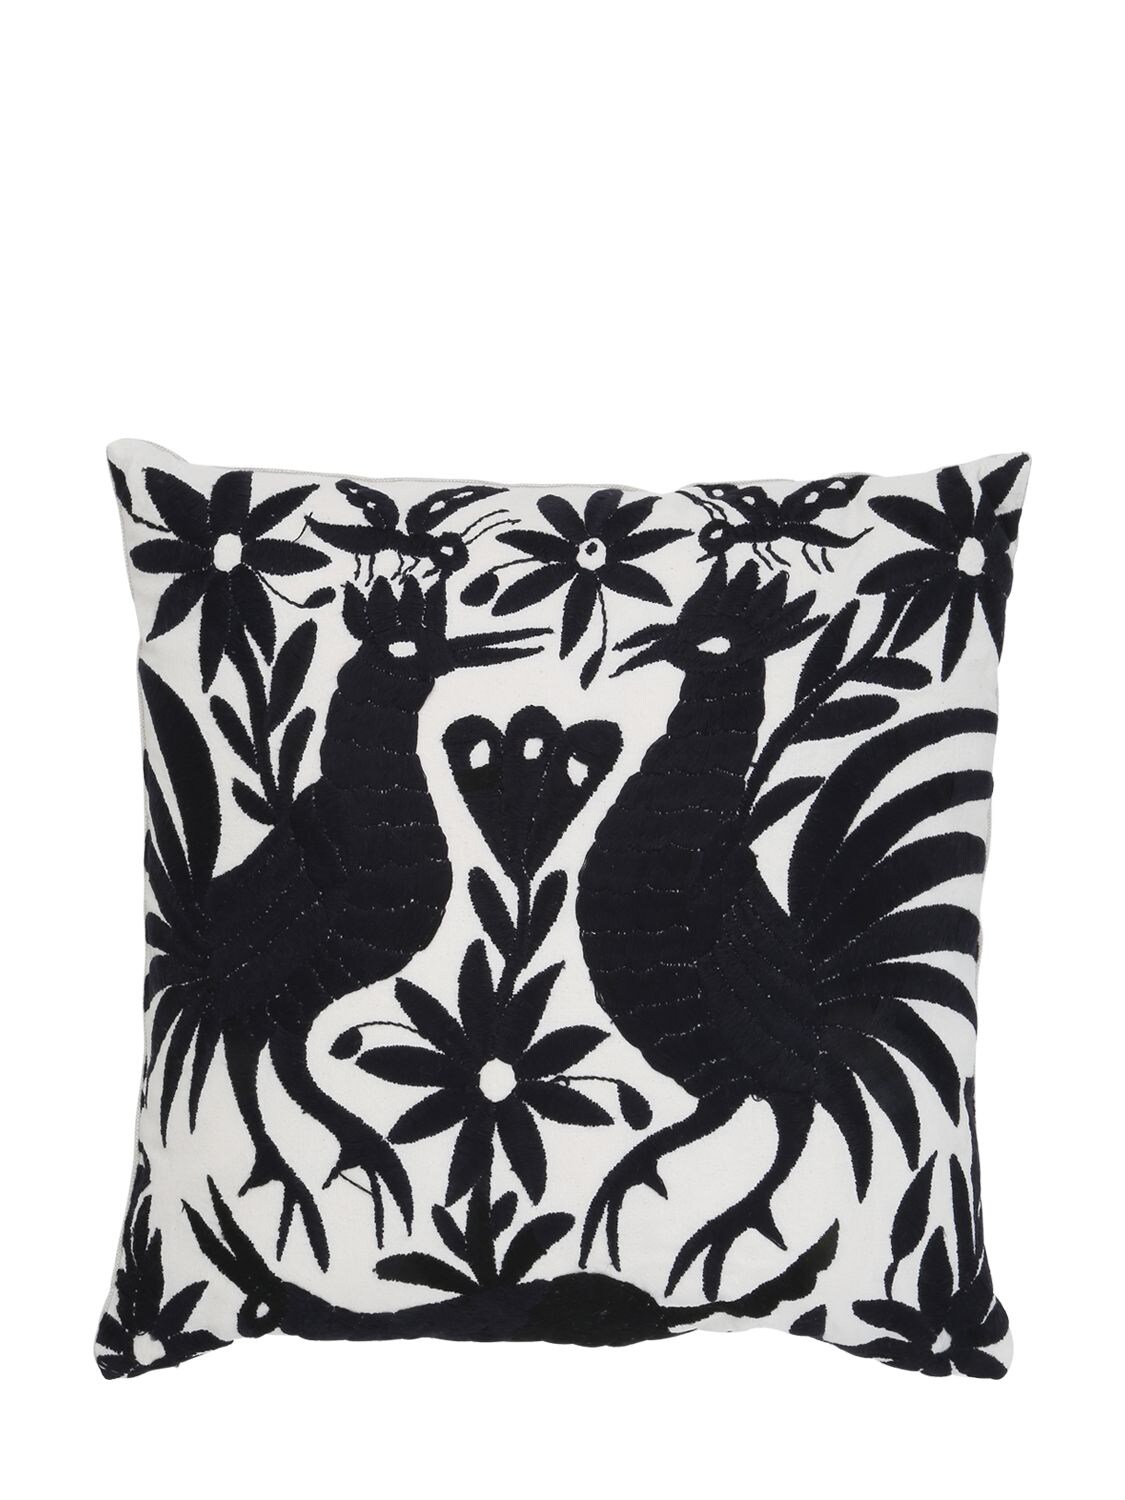 Aniza Oto Hand-embroidered Feather Pillow In Beige/black